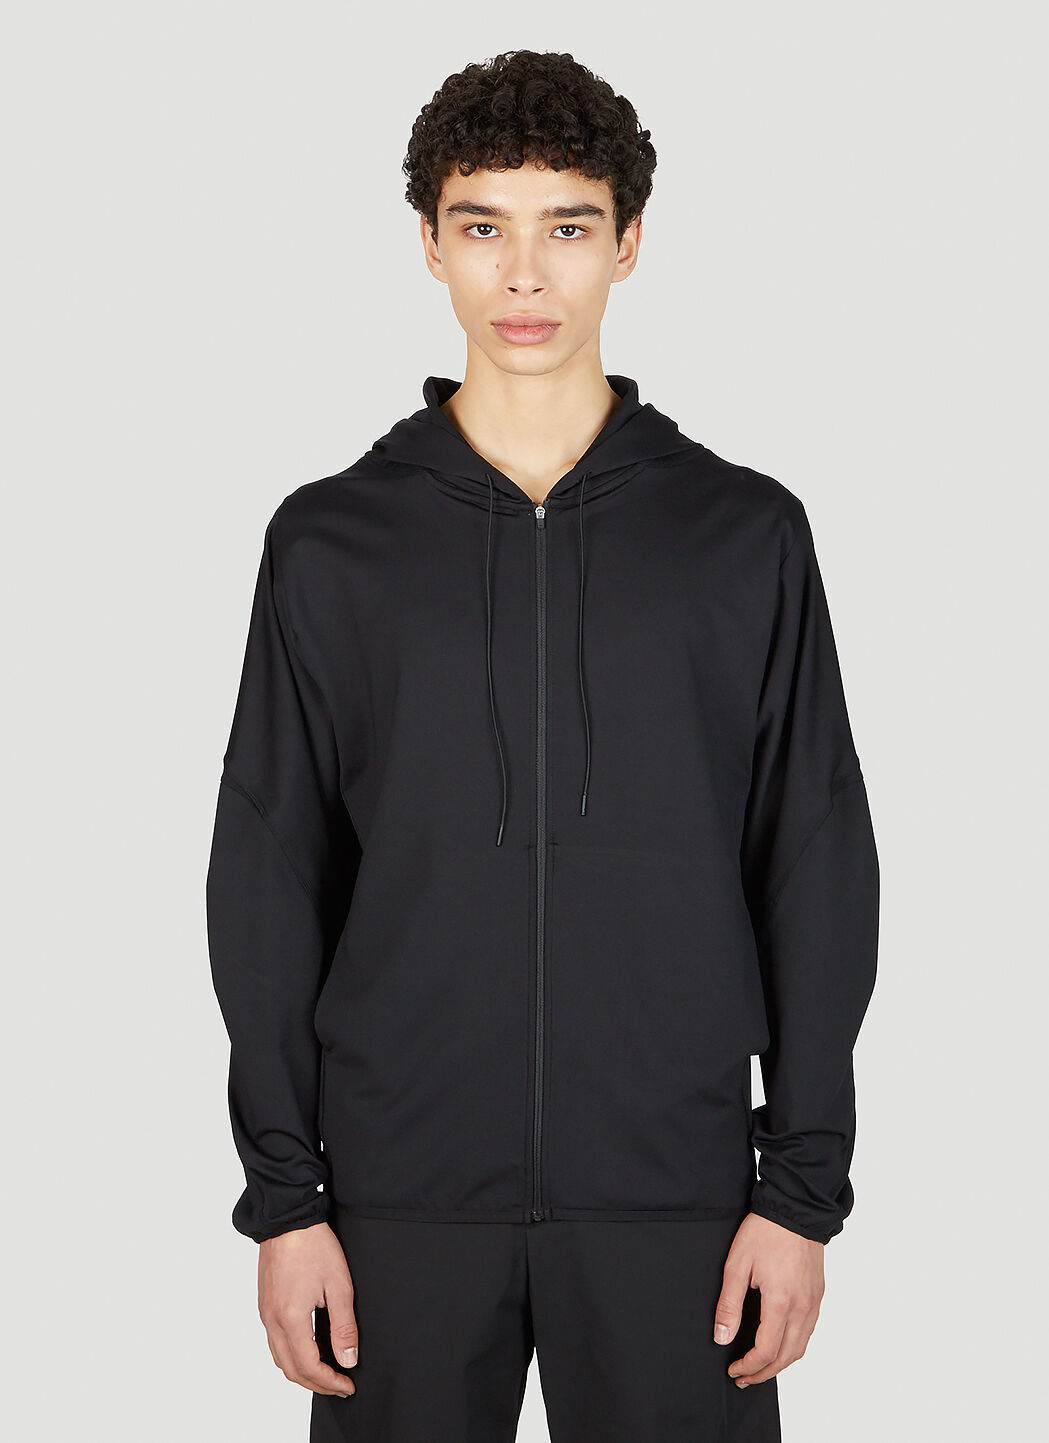 POST ARCHIVE FACTION (PAF) 5.0 Right Hooded Sweatshirt Black paf0154009